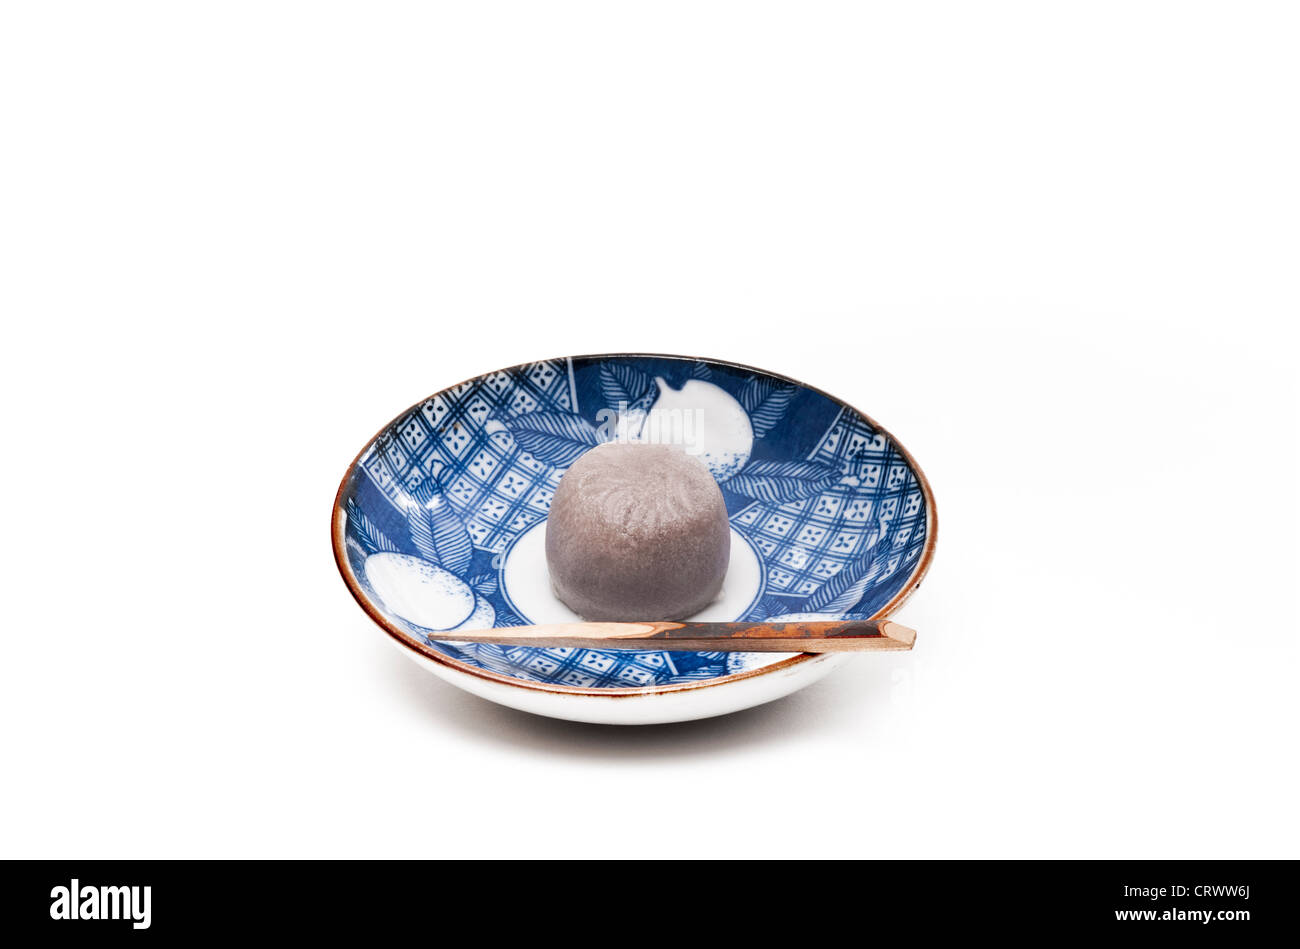 Dolce giapponese, wagashi, forma di bunny Foto Stock